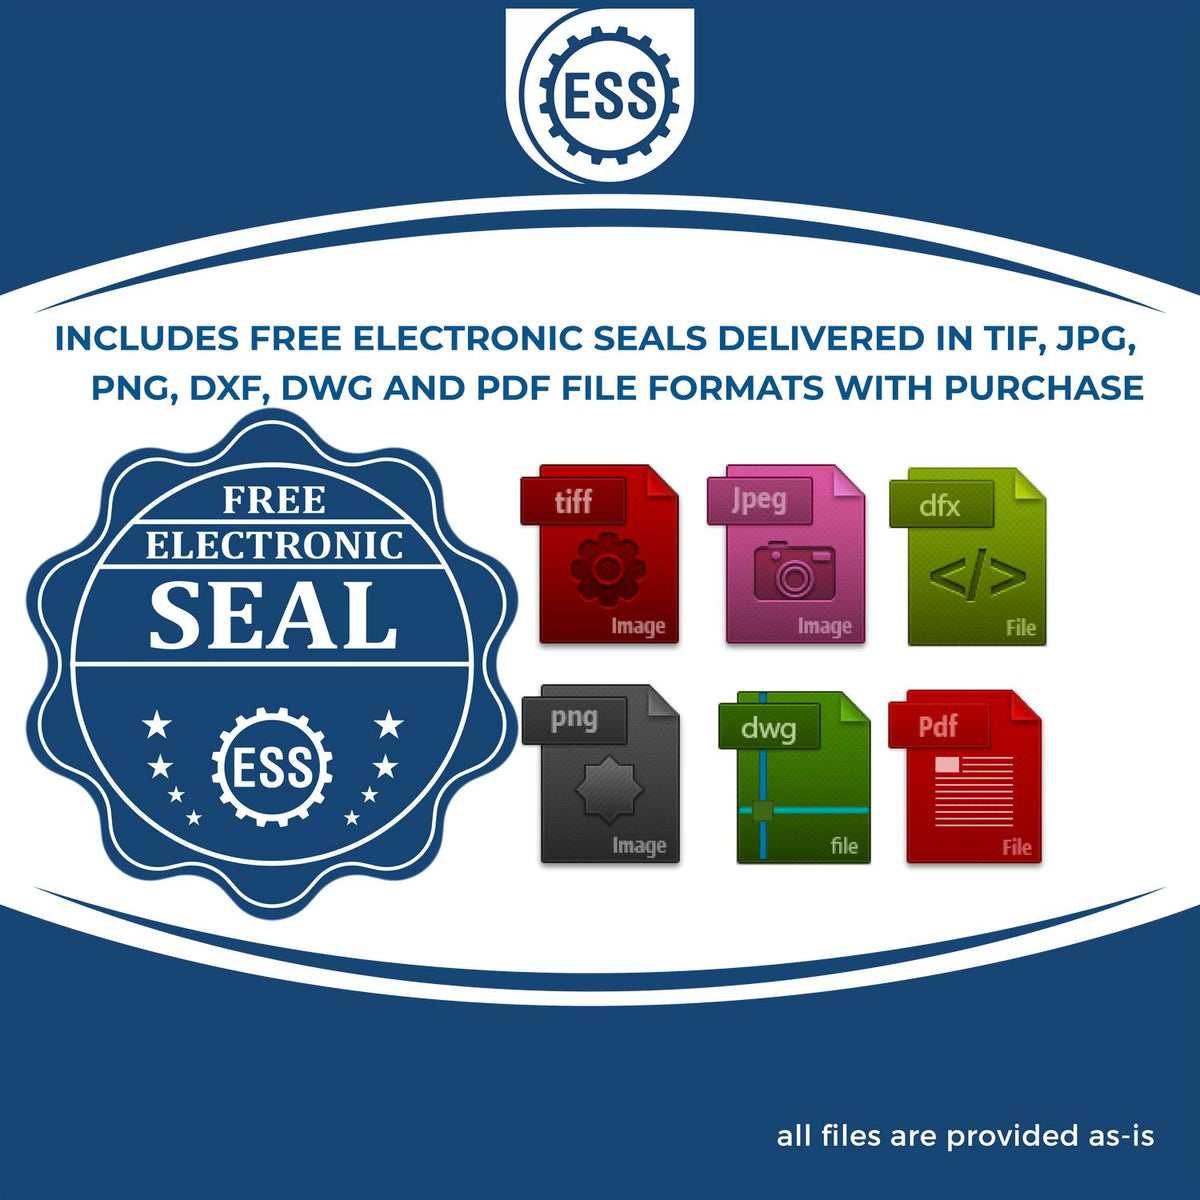 An infographic for the free electronic seal for the Wyoming Geologist Desk Seal illustrating the different file type icons such as DXF, DWG, TIF, JPG and PNG.